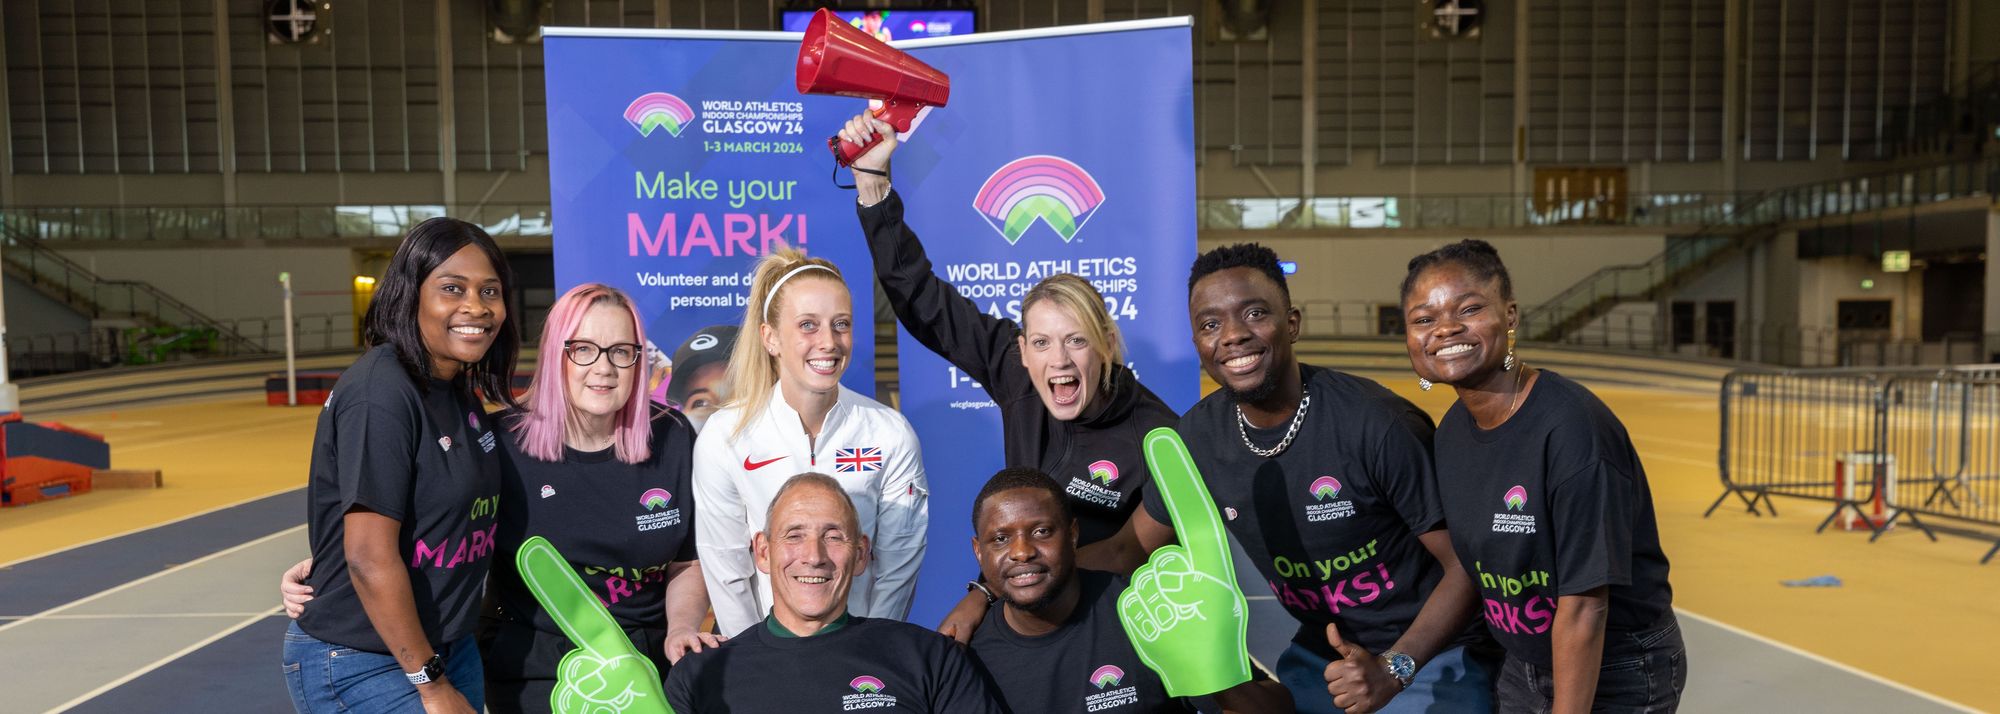 Track stars call out for volunteers as thoughts turn to the indoor format of the sport and preparations for next year’s World Athletics Indoor Championships in Glasgow. 

